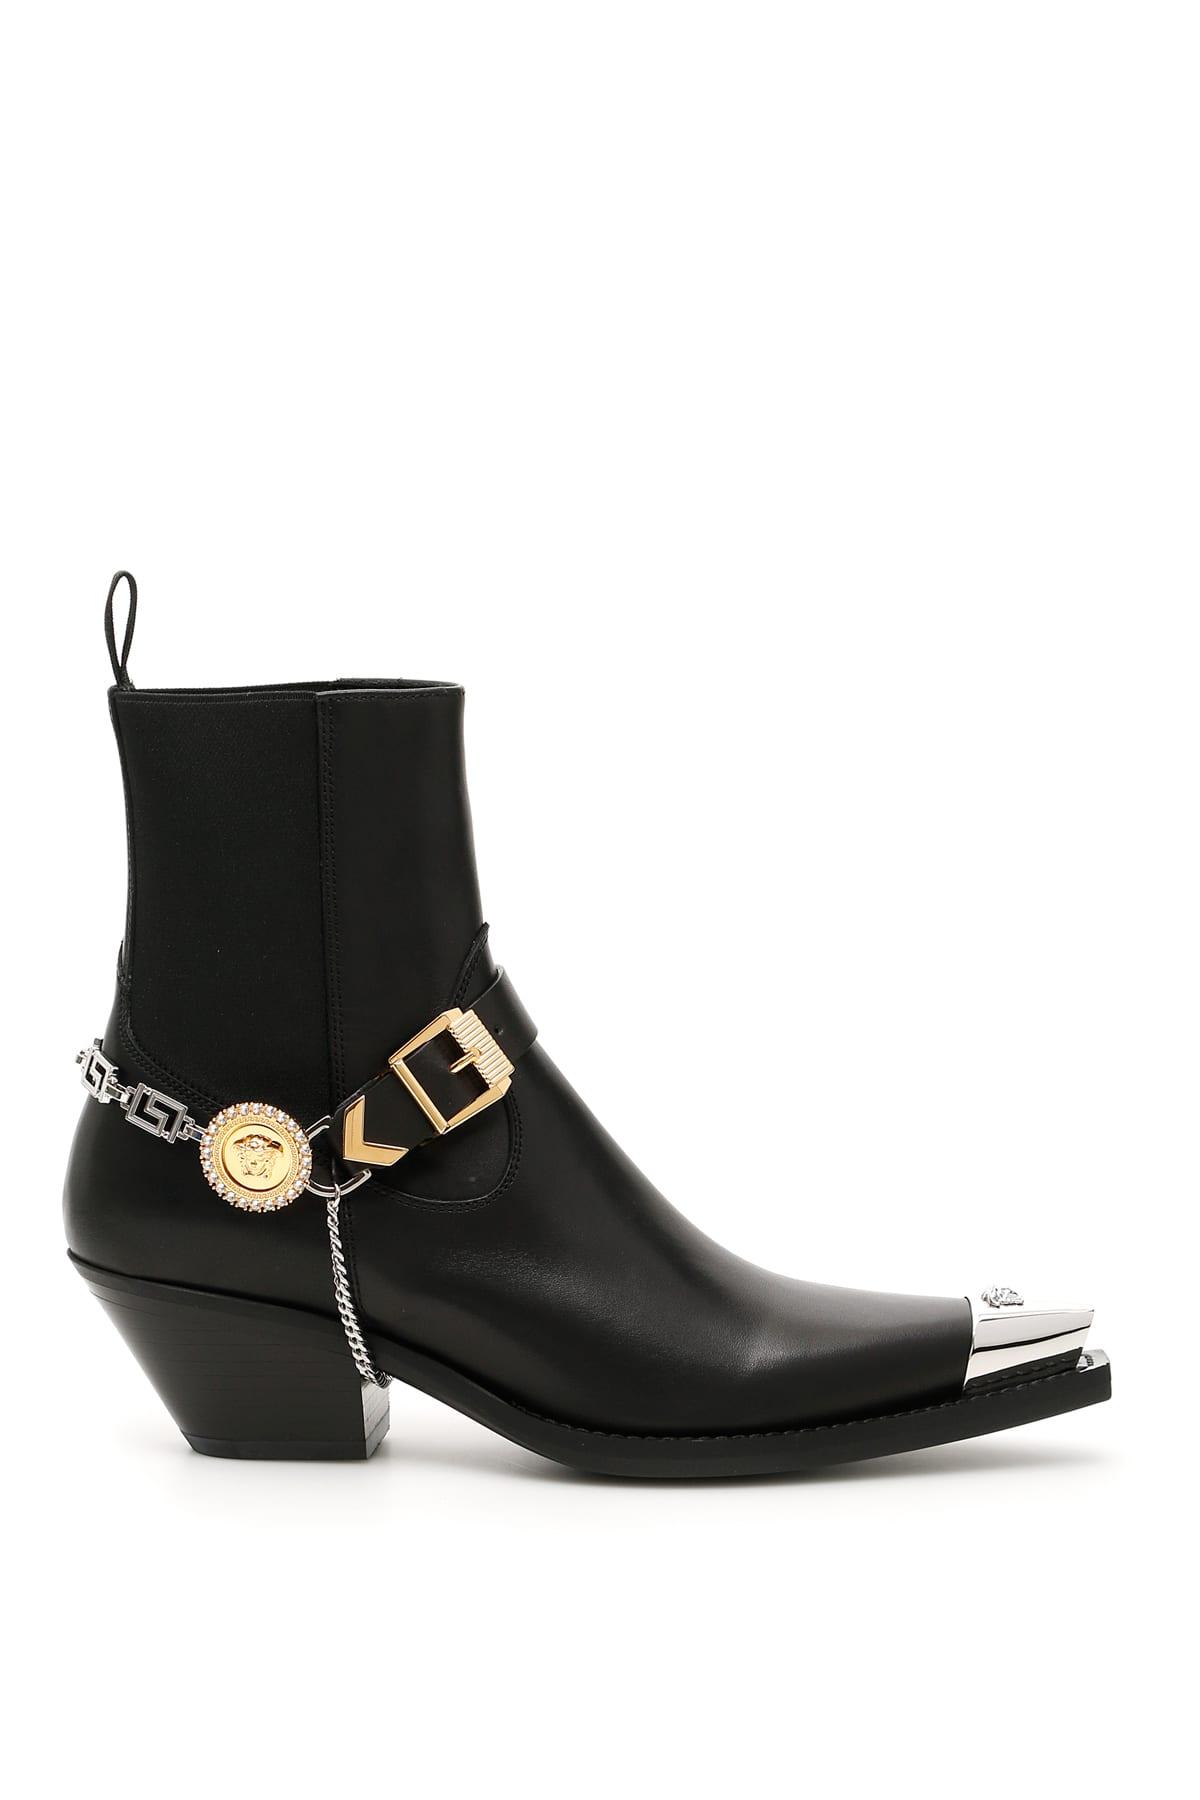 Versace Leather Medusa Chain Western Boots in Black - Lyst